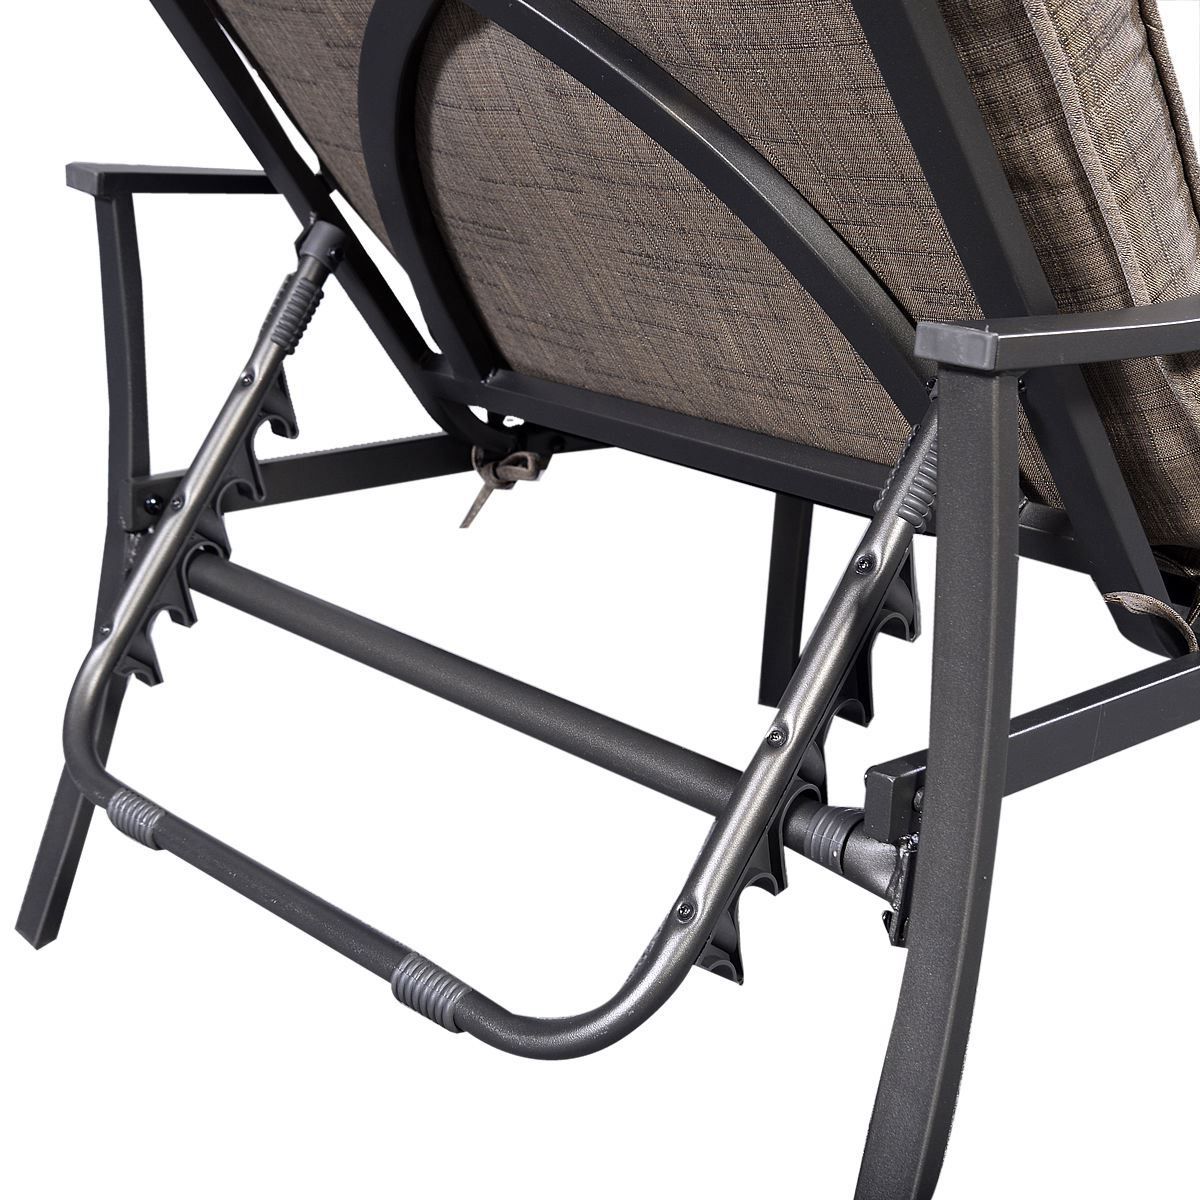 Famous Furniture: Steel Frame Patio Adjustable Recliner Chair For Pool With Regard To Adjustable Pool Chaise Lounge Chair Recliners (View 9 of 15)